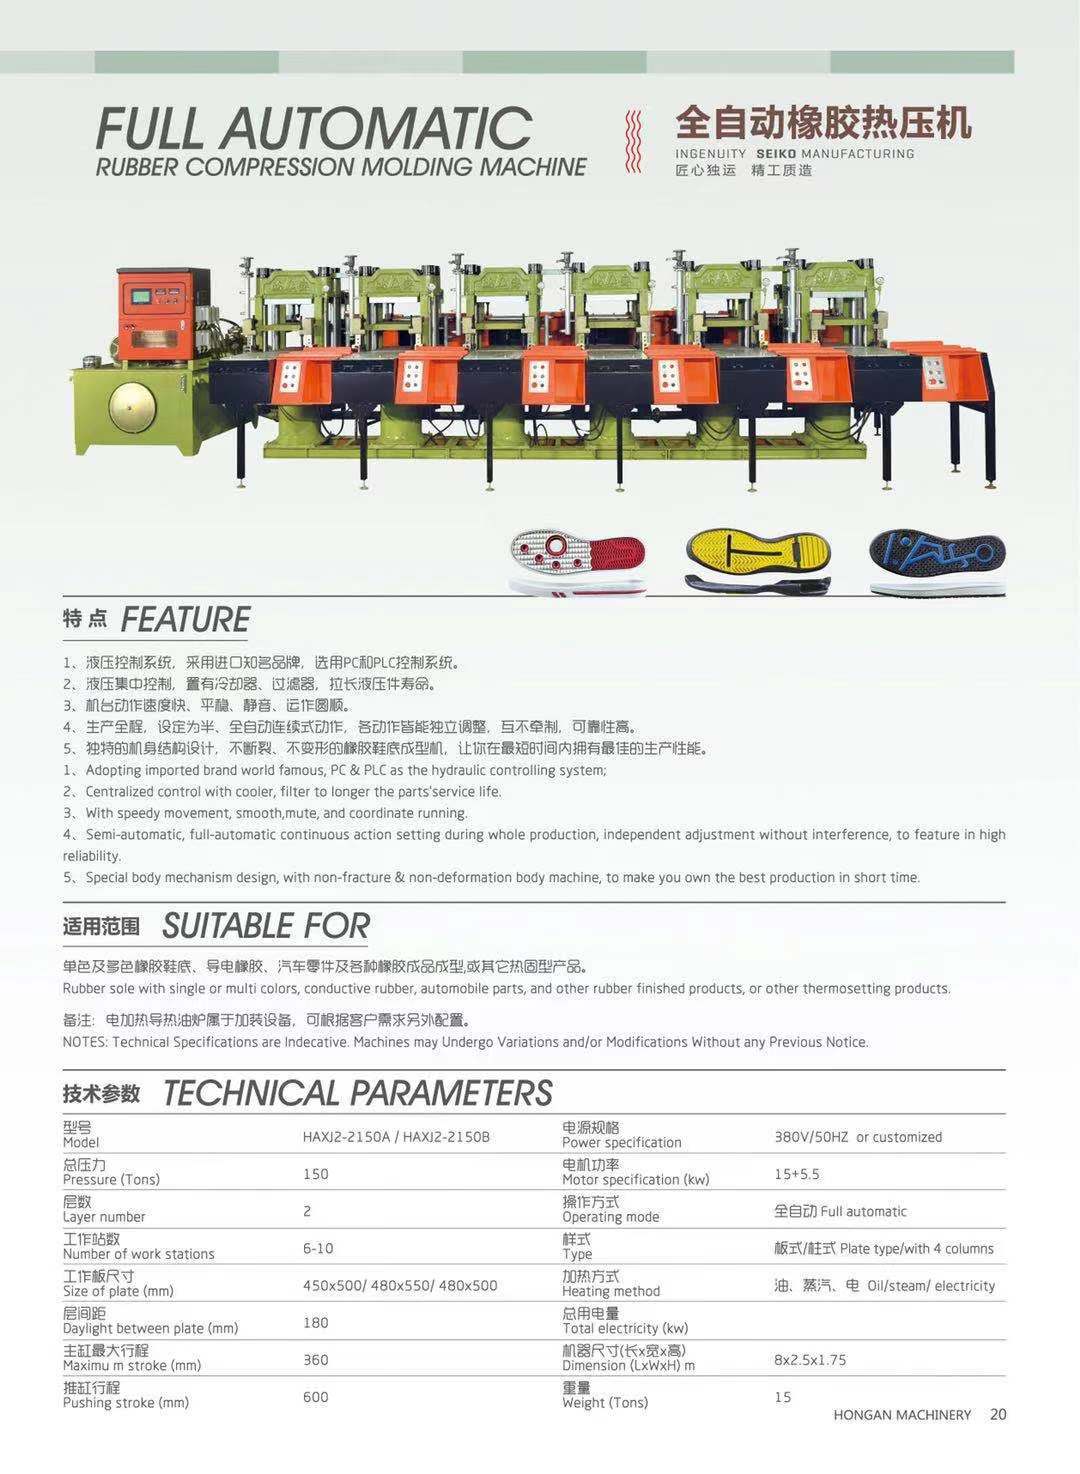 Fully automatic rubber sole compression molding machine